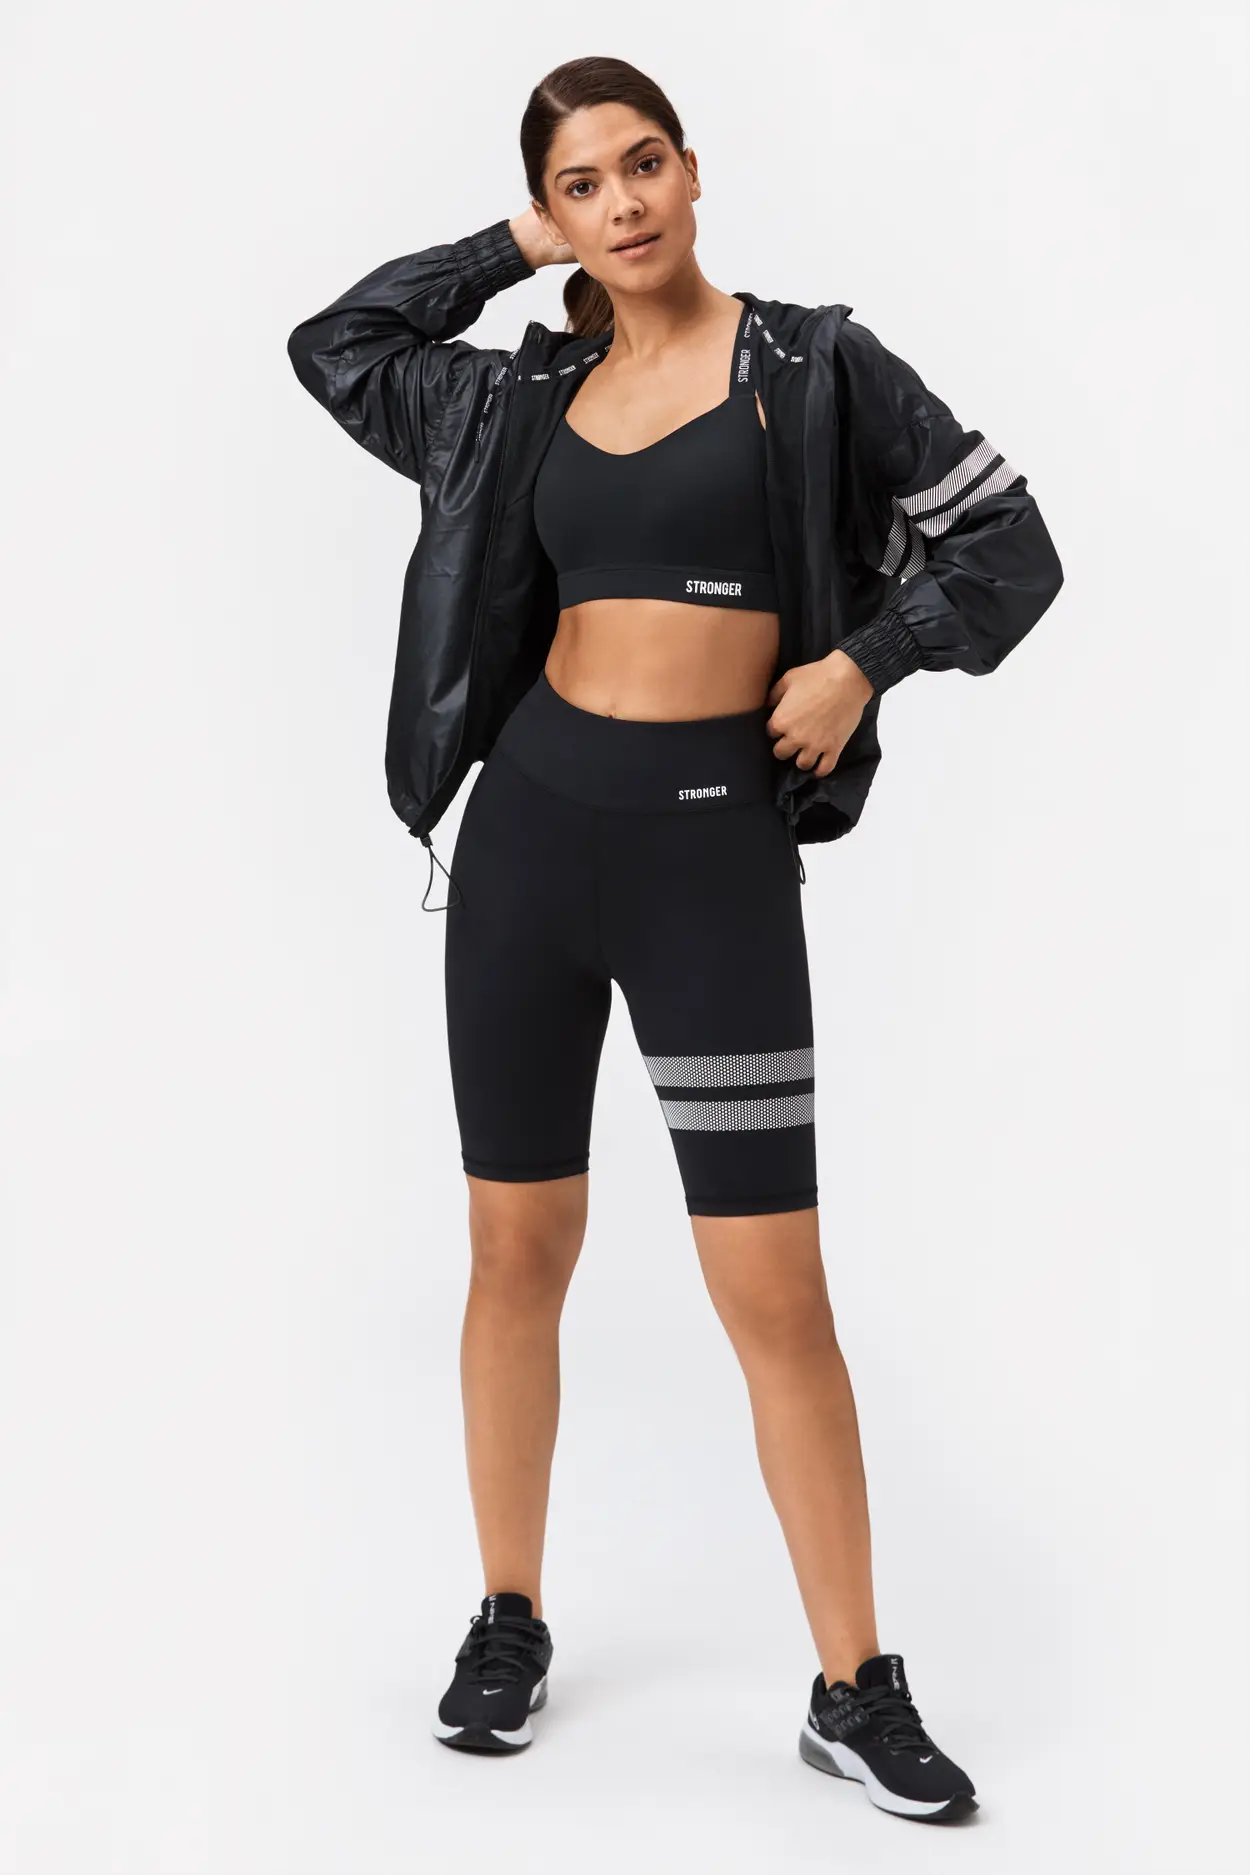 Yummie Cora Shaping Bike Short, Black, Size L/XL, from Soma